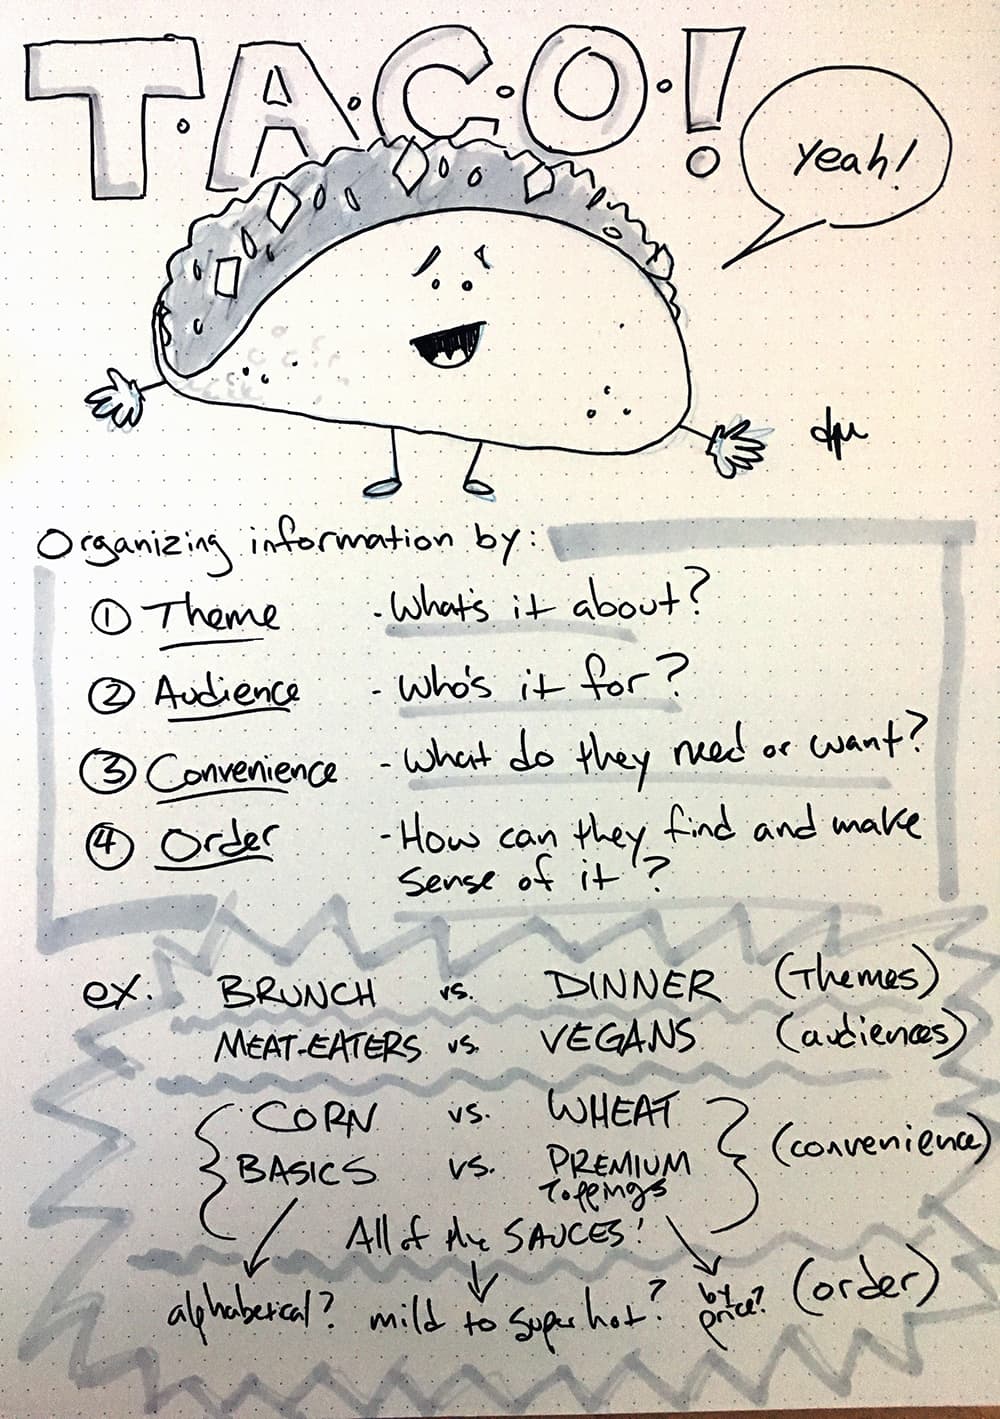 Drawing of a happy taco, followed by my initial sketched notes on organizing information in this way, with an example as described in the text below.